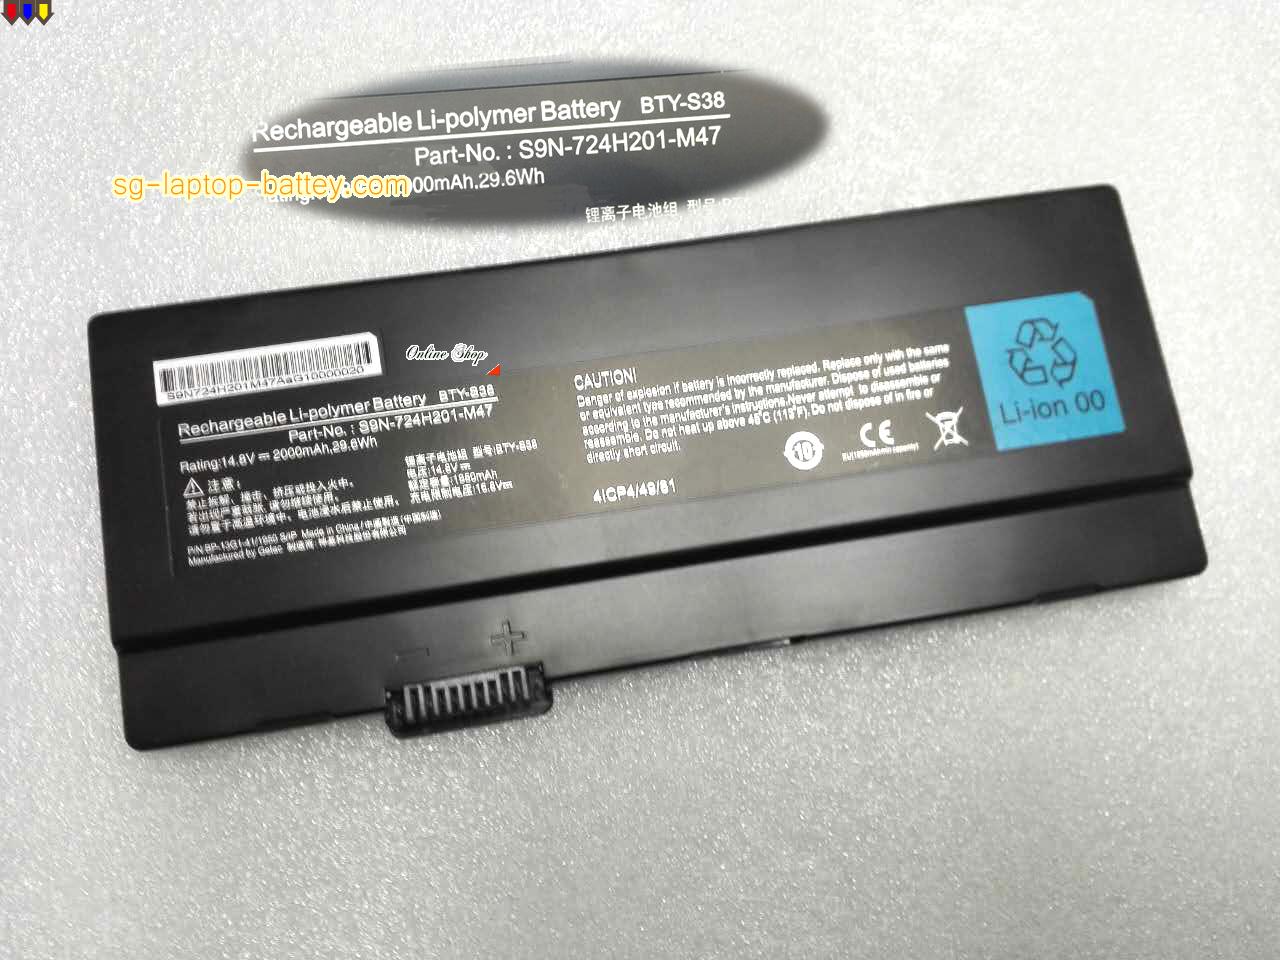 Genuine MSI BTY-S38 Laptop Battery S9N-724H201-M47 rechargeable 2000mAh, 29.6Wh Black In Singapore 